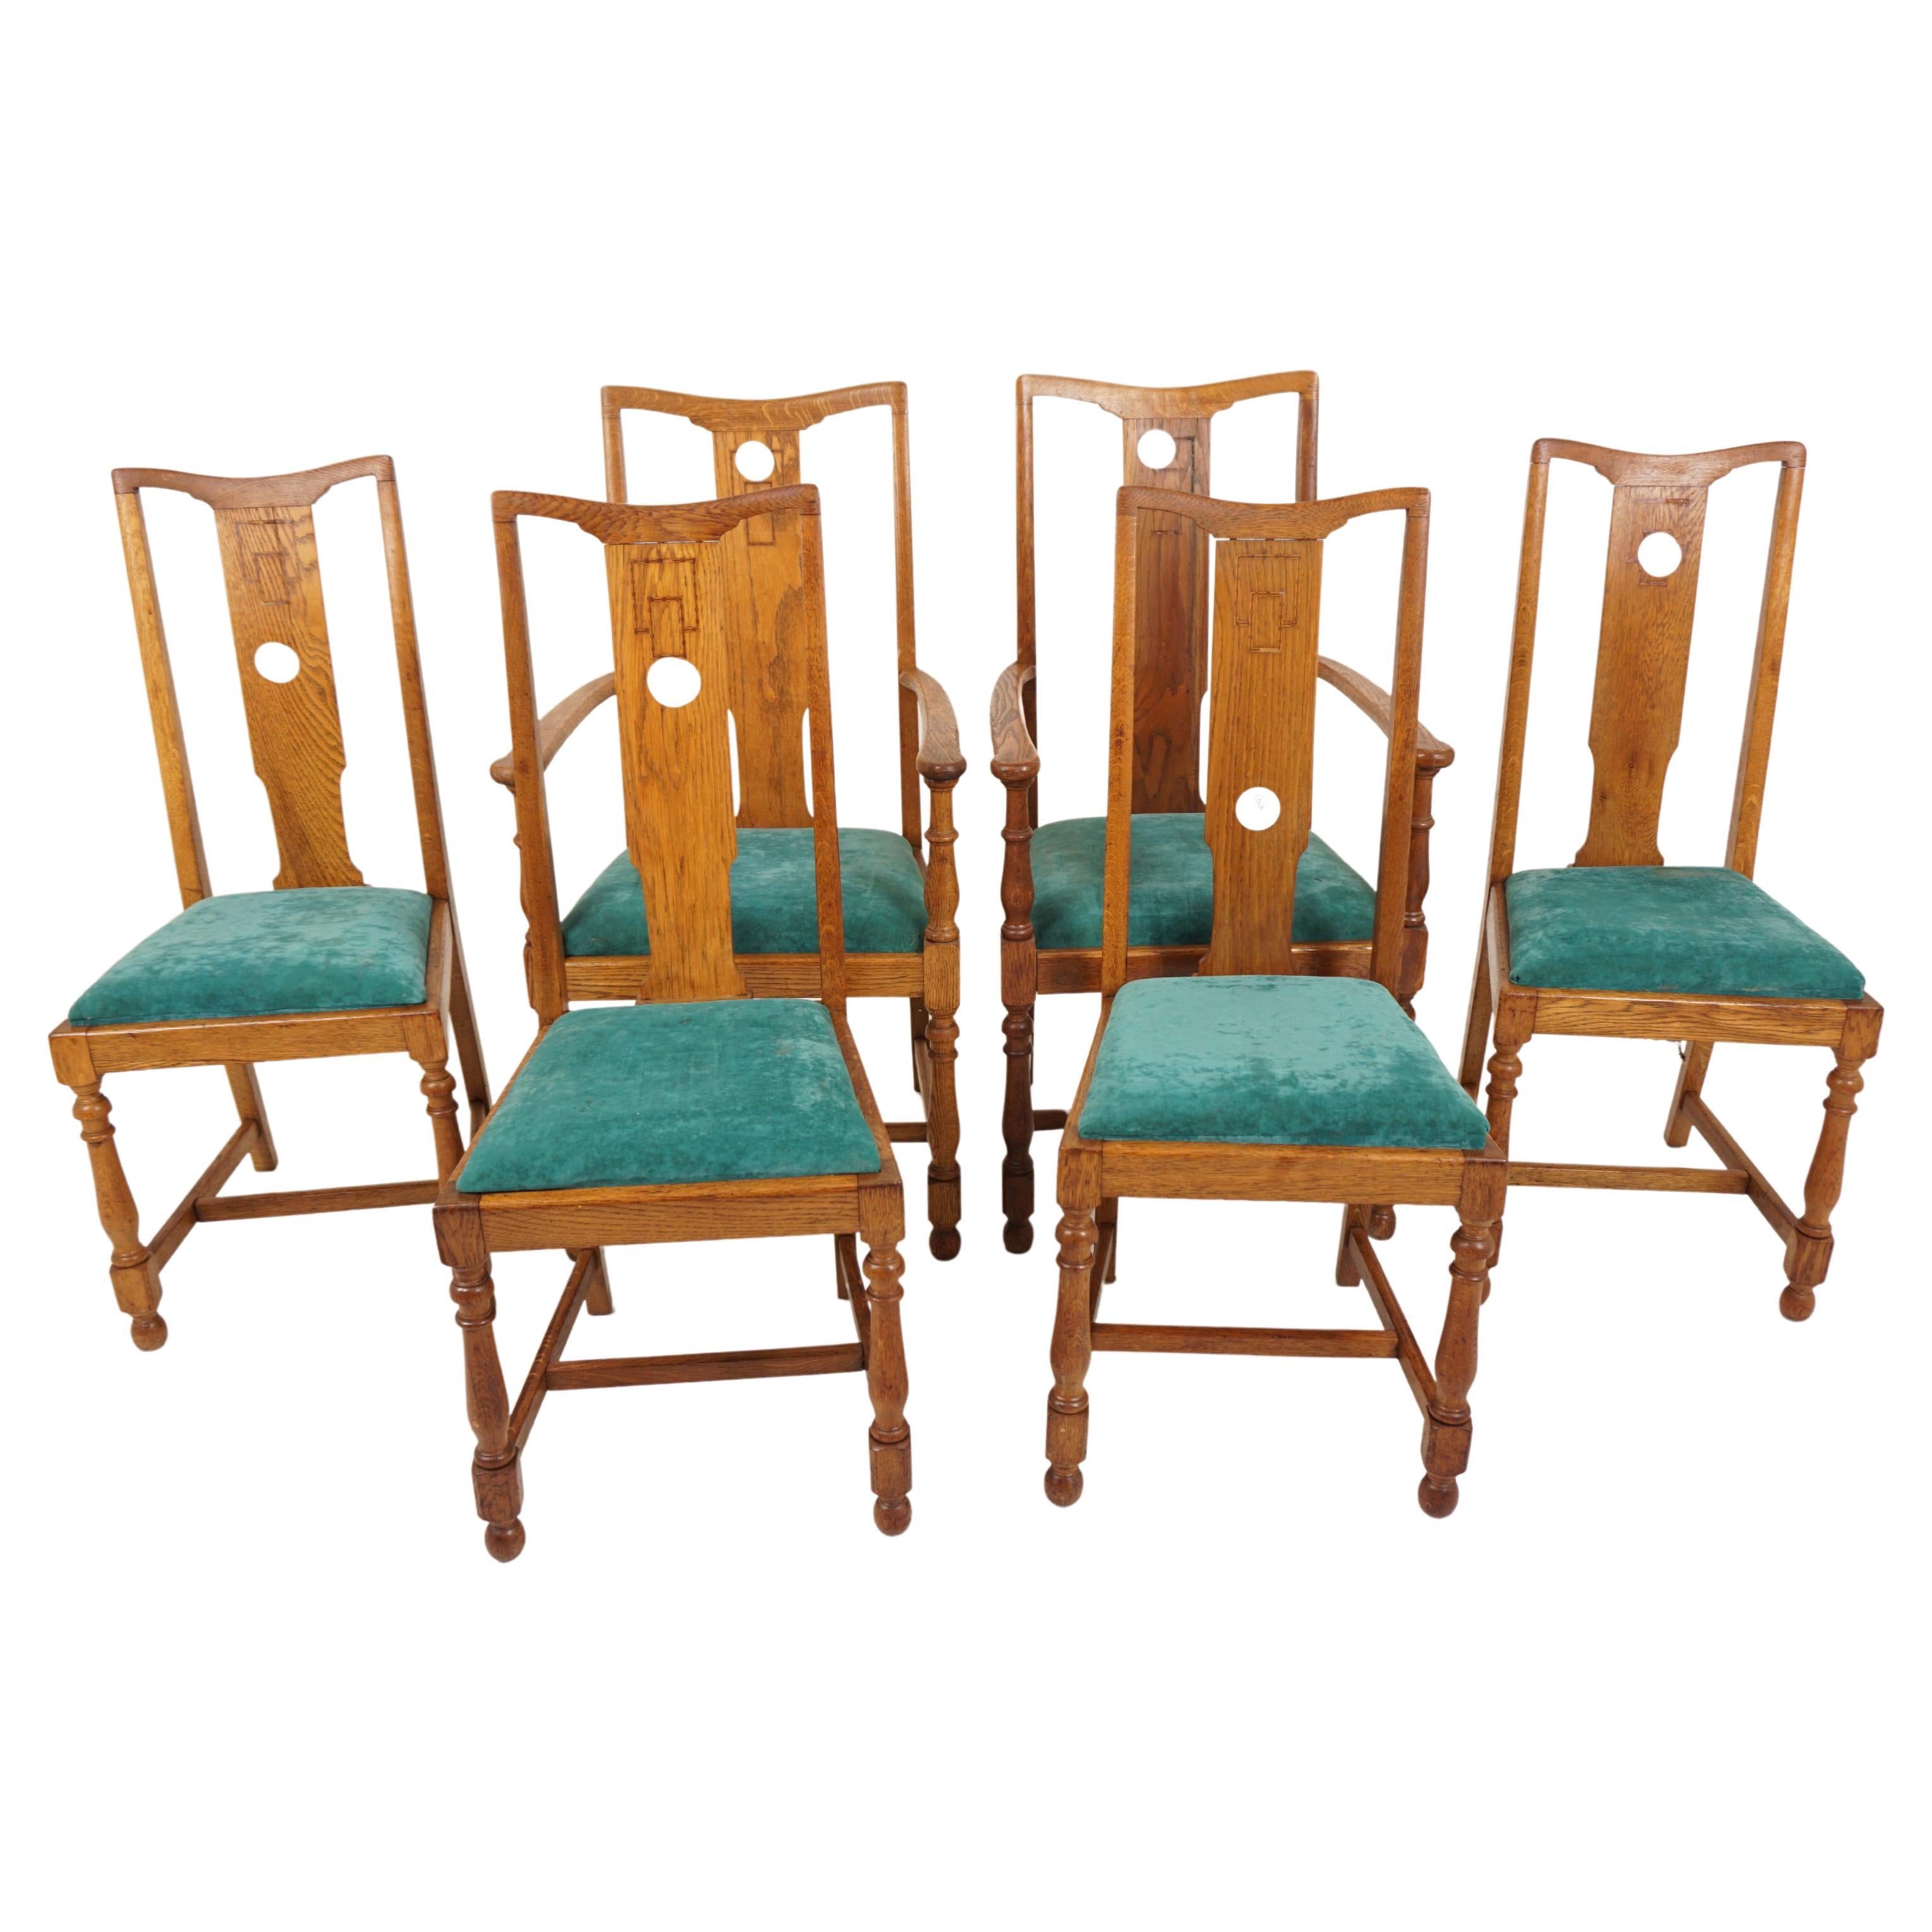 6 Inlaid Oak Arts and Crafts Dining Chairs '4 + 2', Scotland 1910, H883